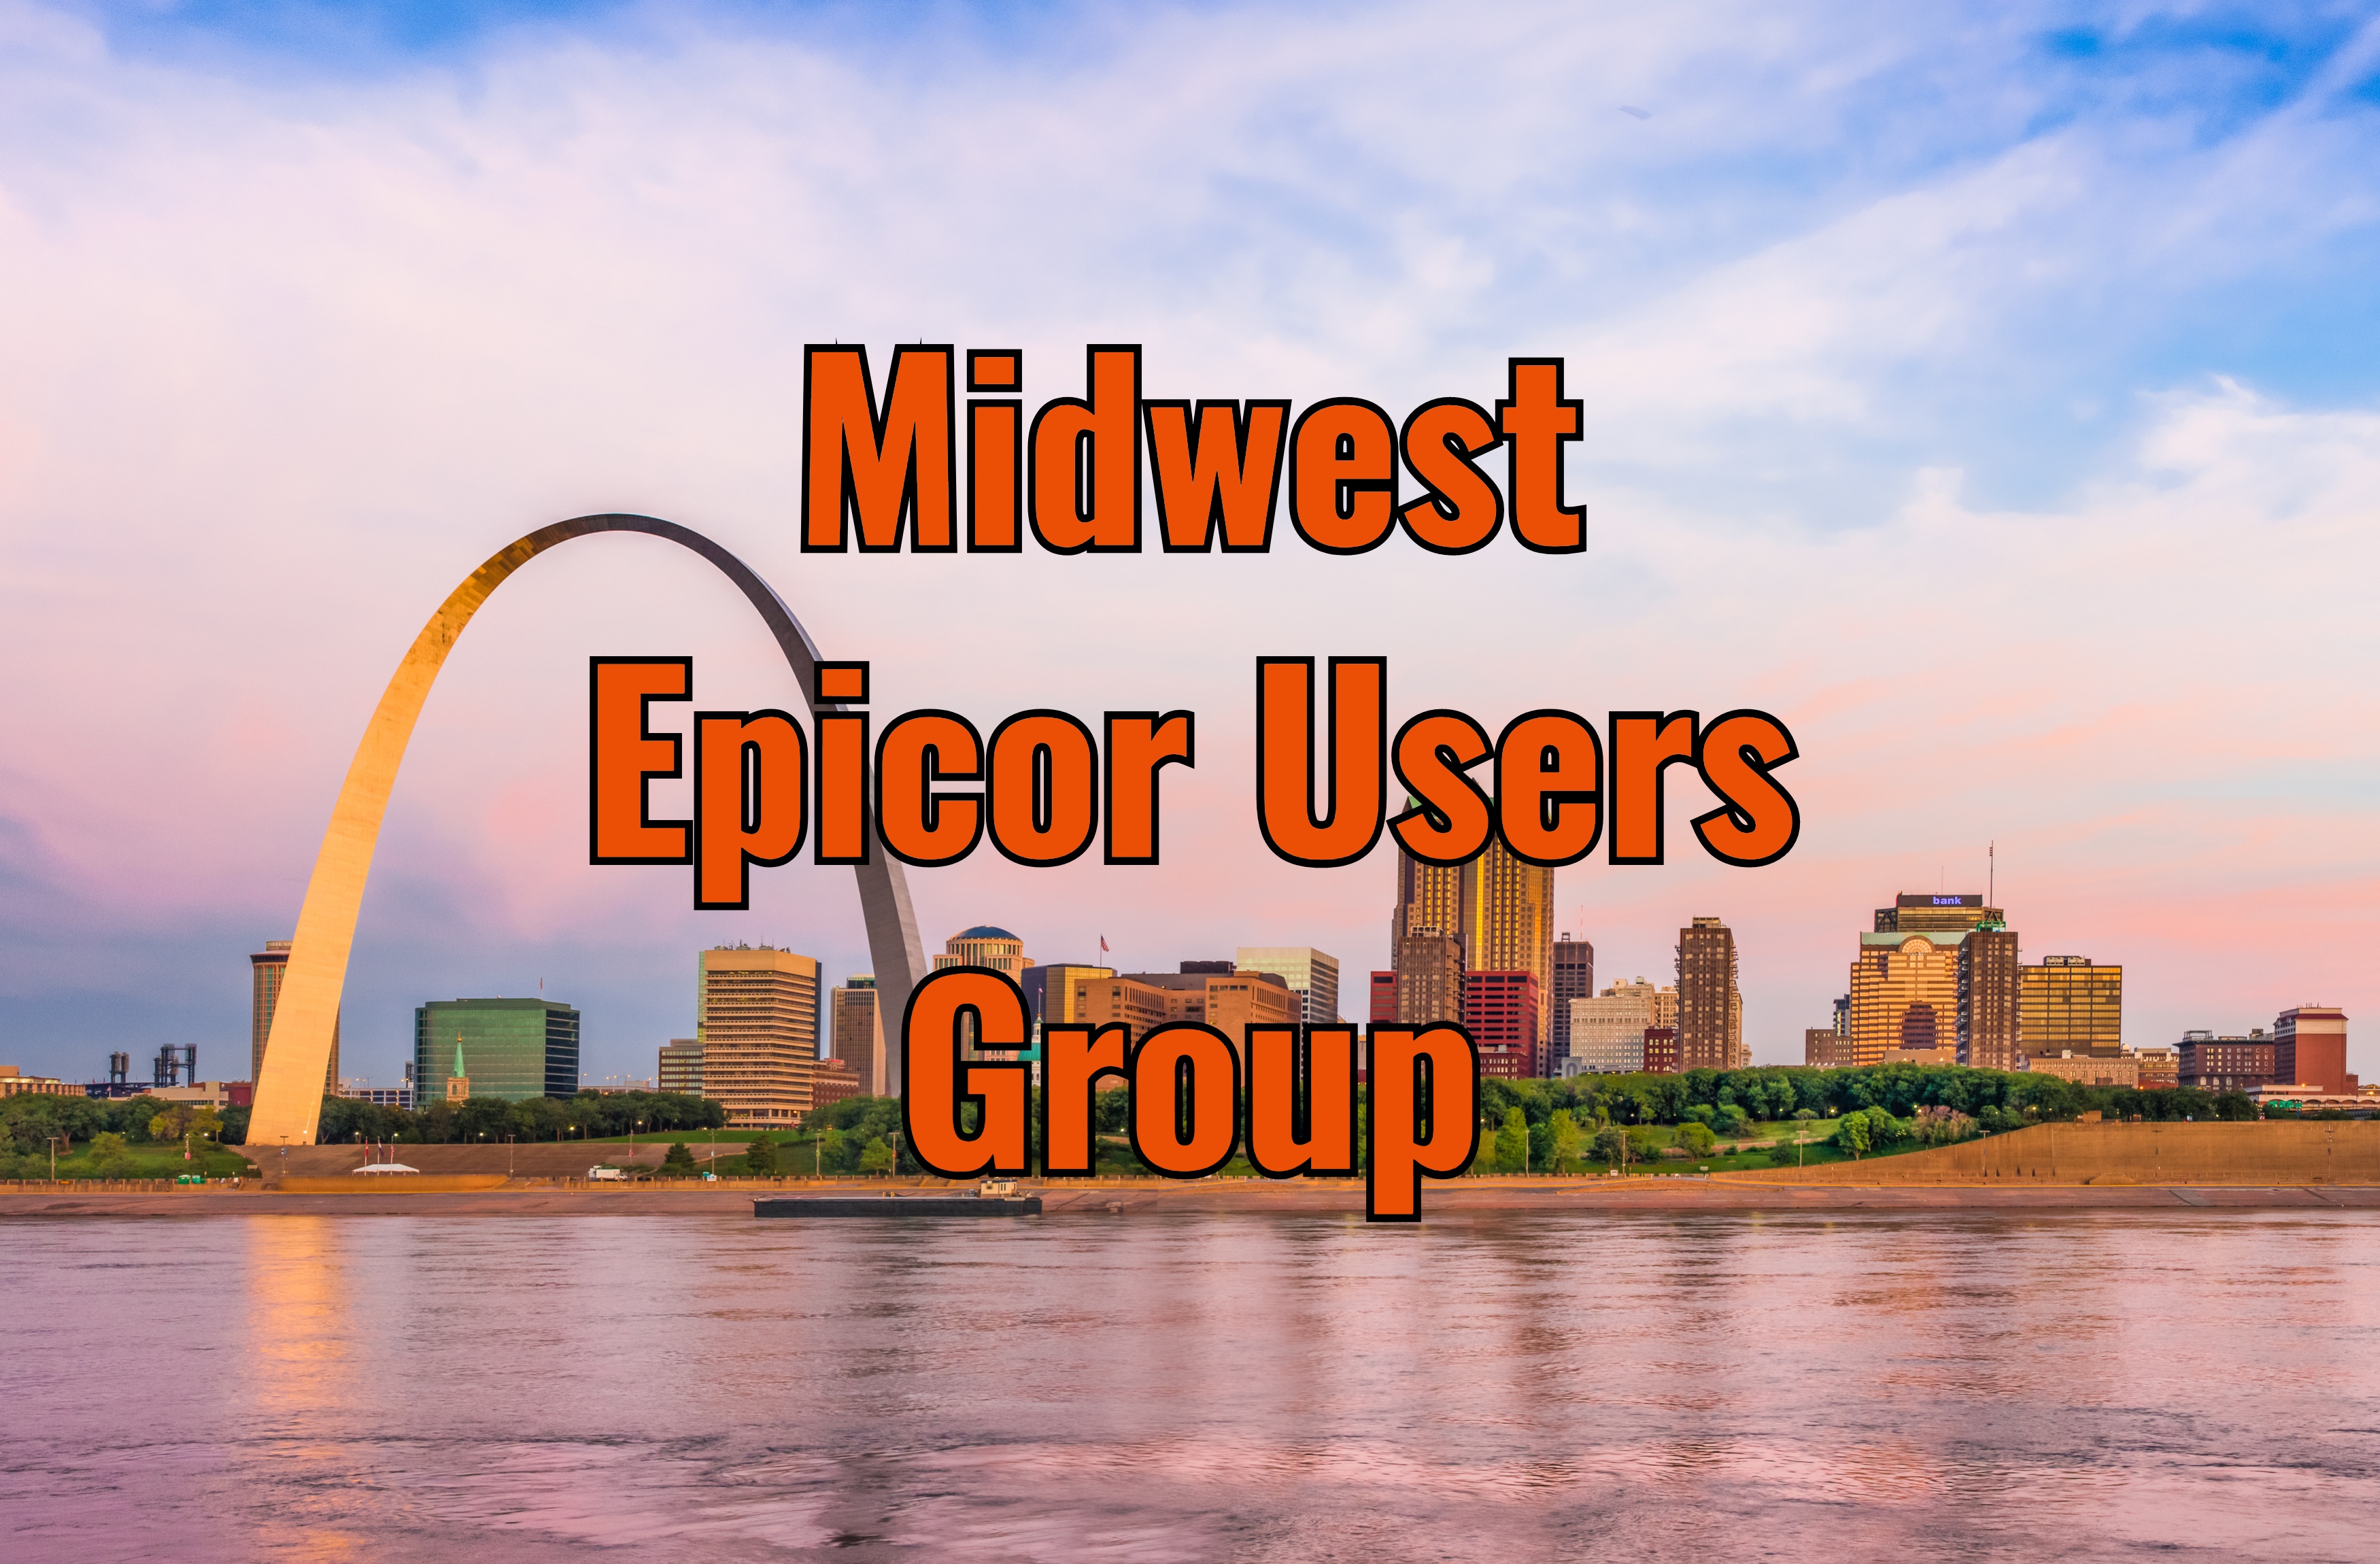 midwest-epicor-users-group.jpg